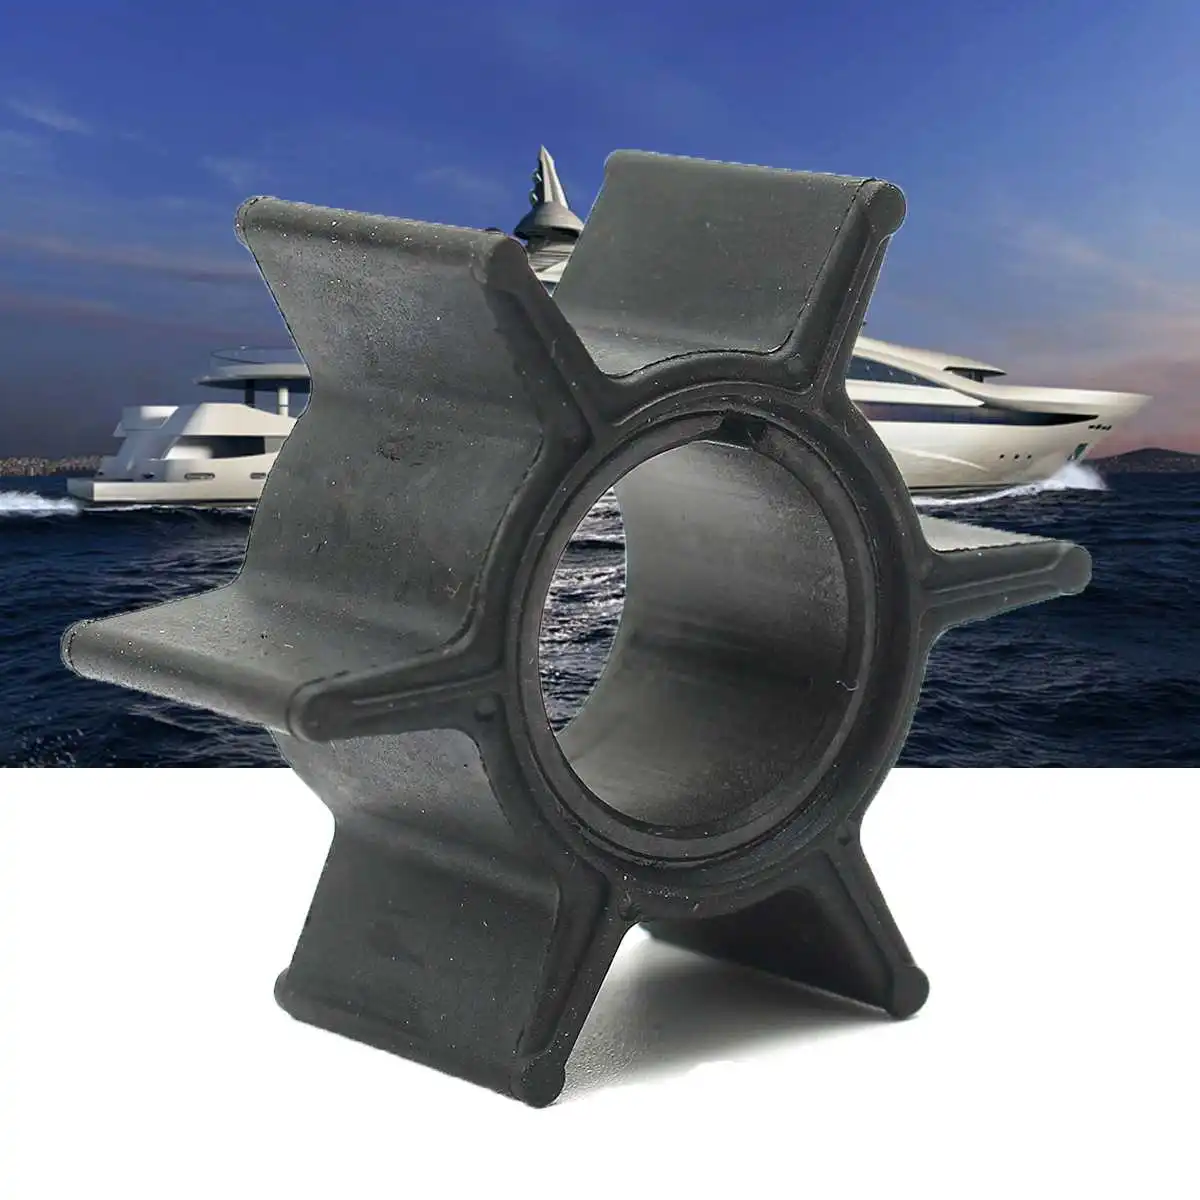 

345-65021-0 / 18-8923 Water Pump Impeller For Tohatsu &Mercury 25/30/40HP Outboard Motor 6 Blades Boat Parts Black Rubber